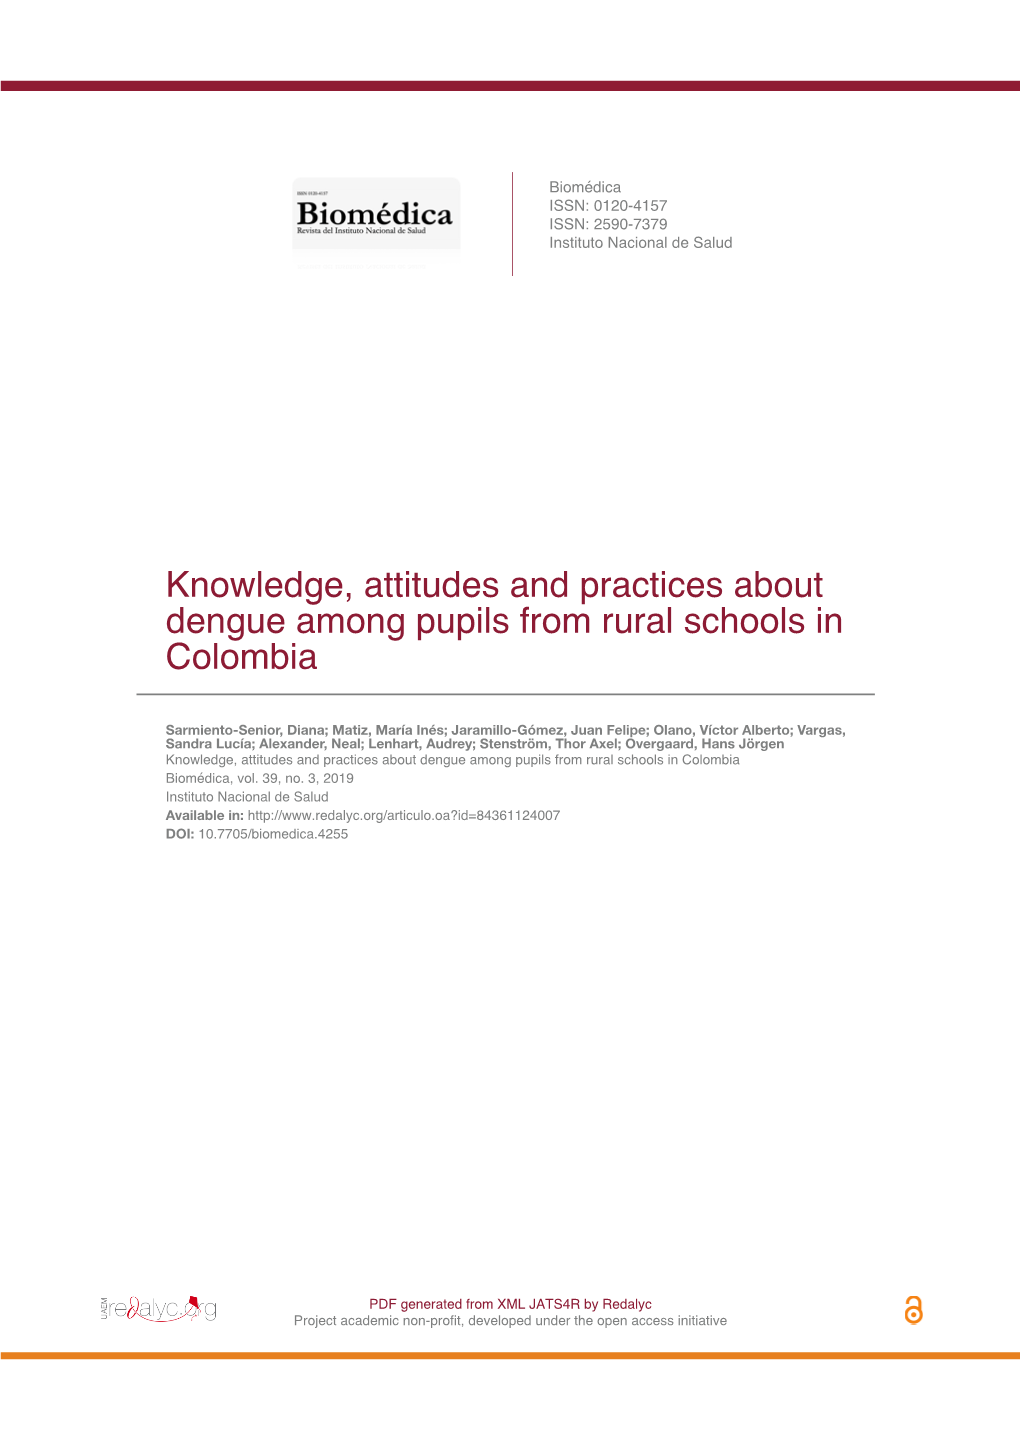 Knowledge, Attitudes and Practices About Dengue Among Pupils from Rural Schools in Colombia